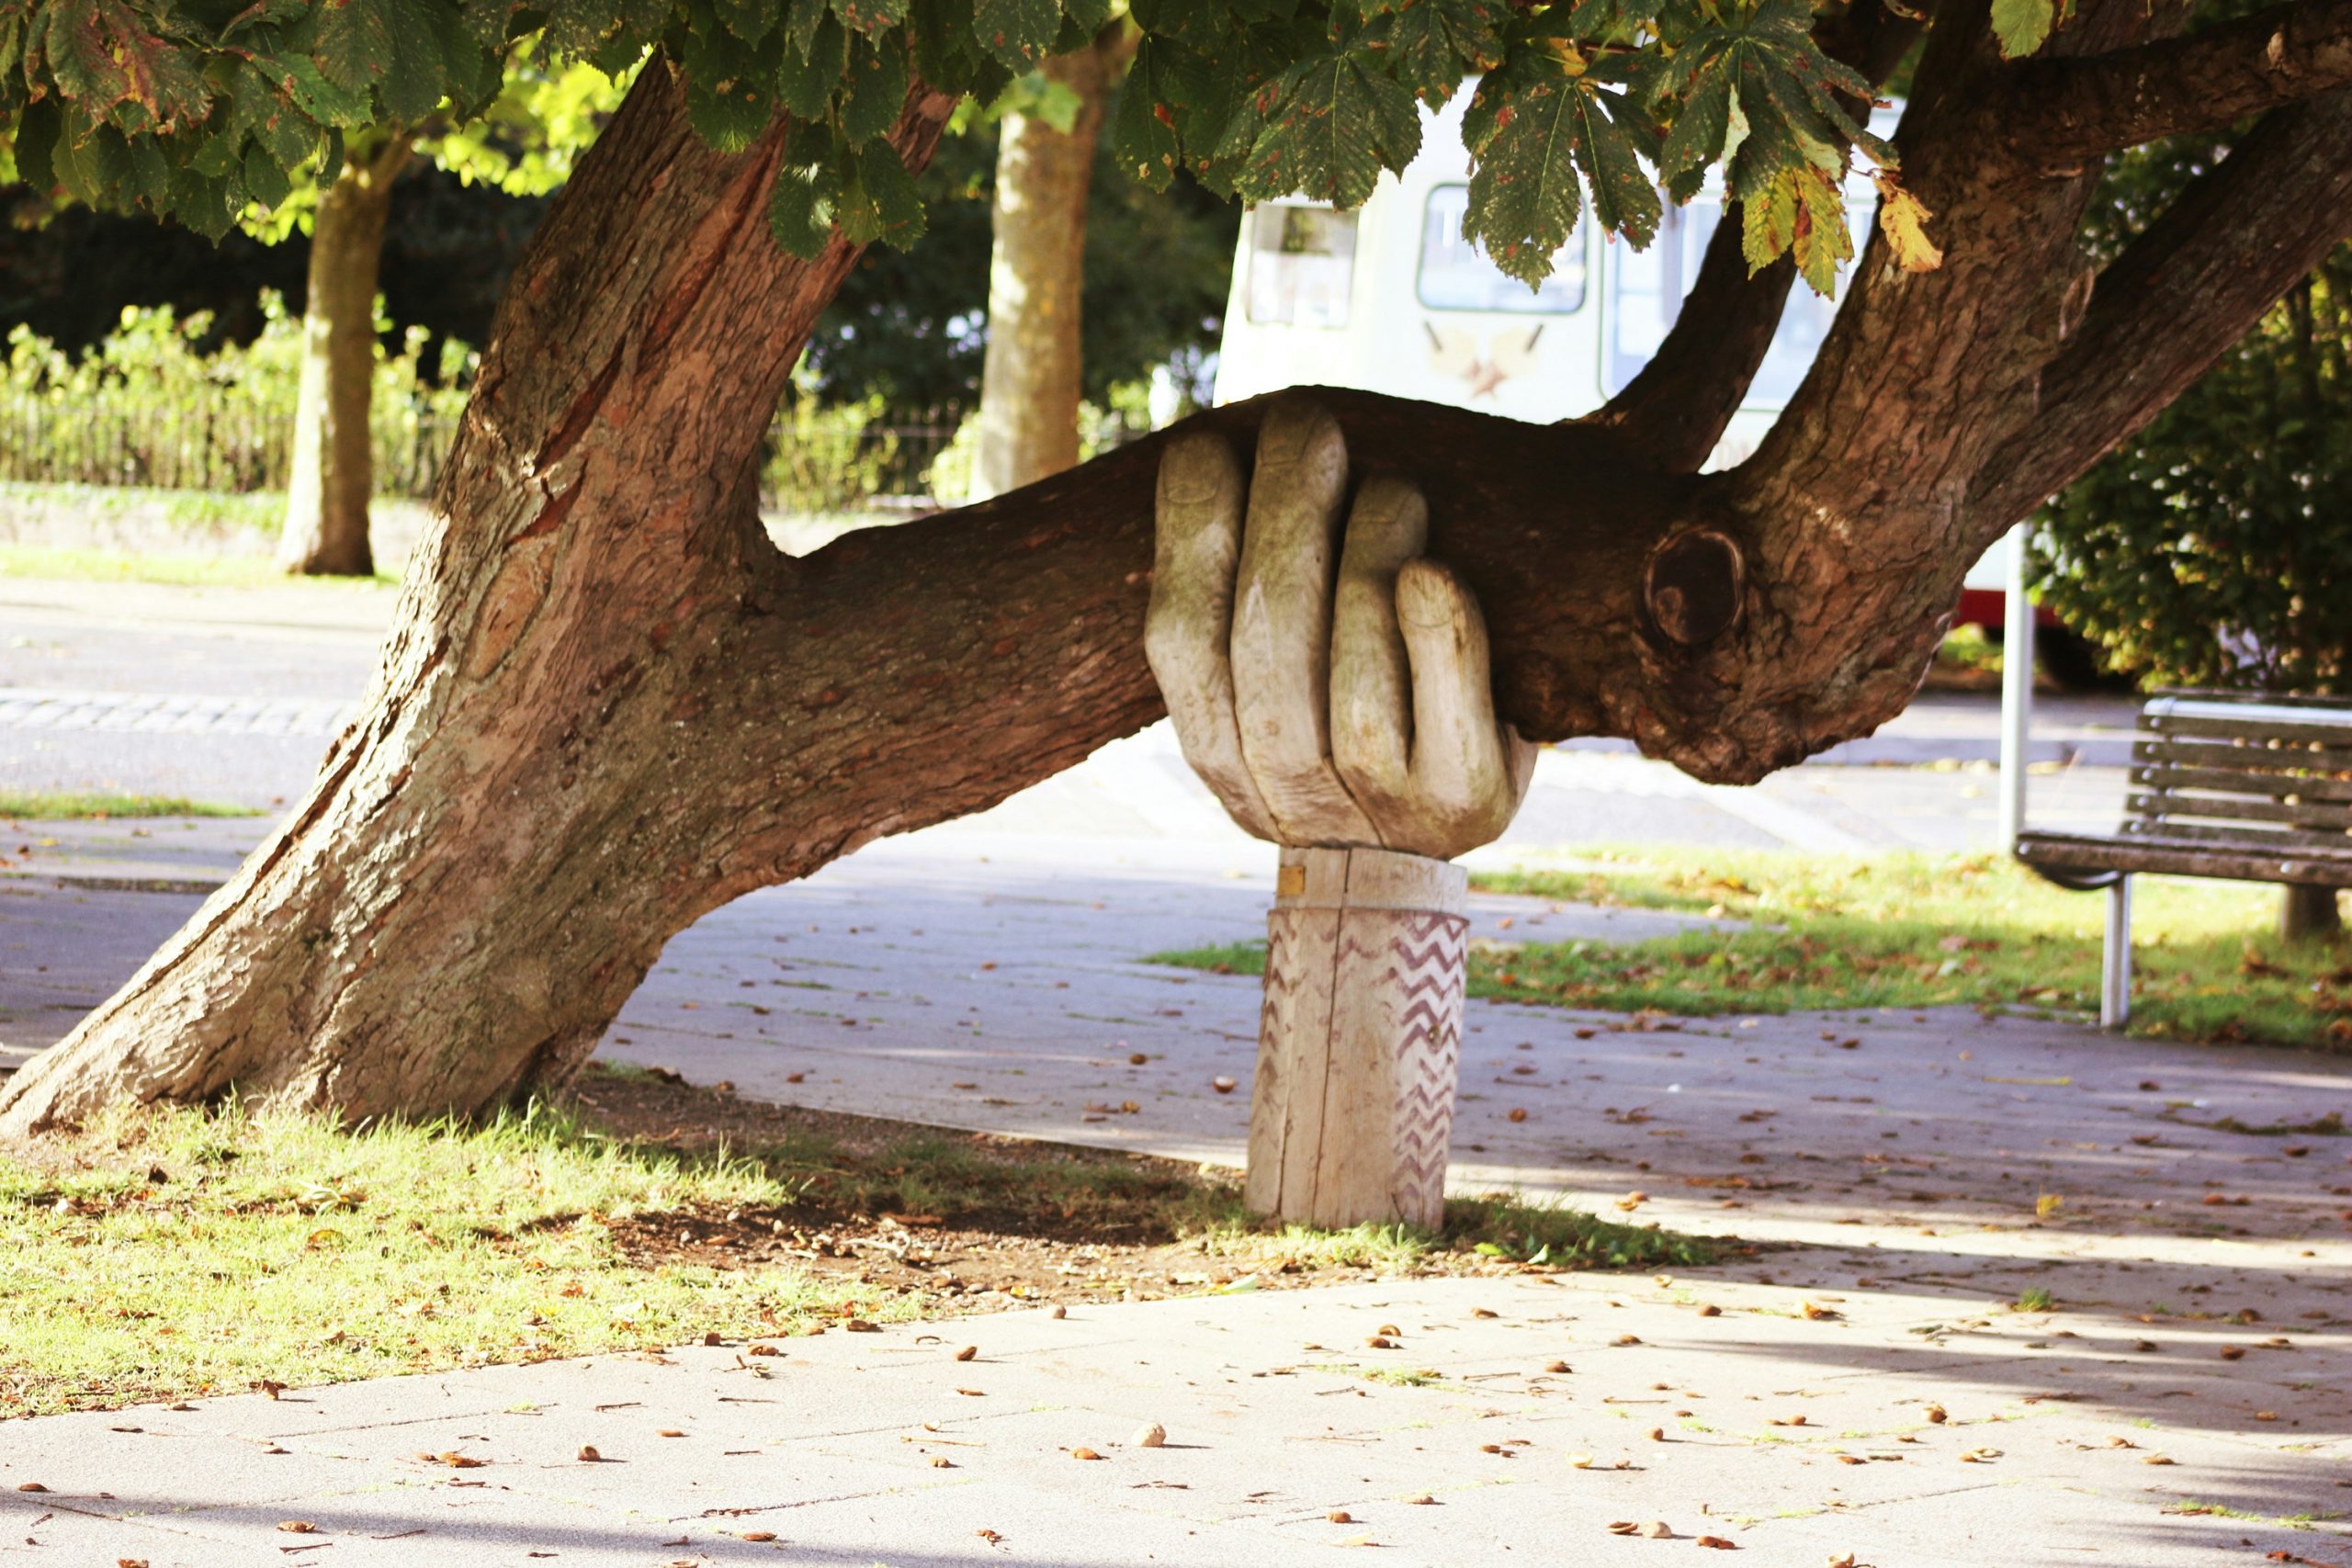 A sculpture of a hand holding up a large tree branch.